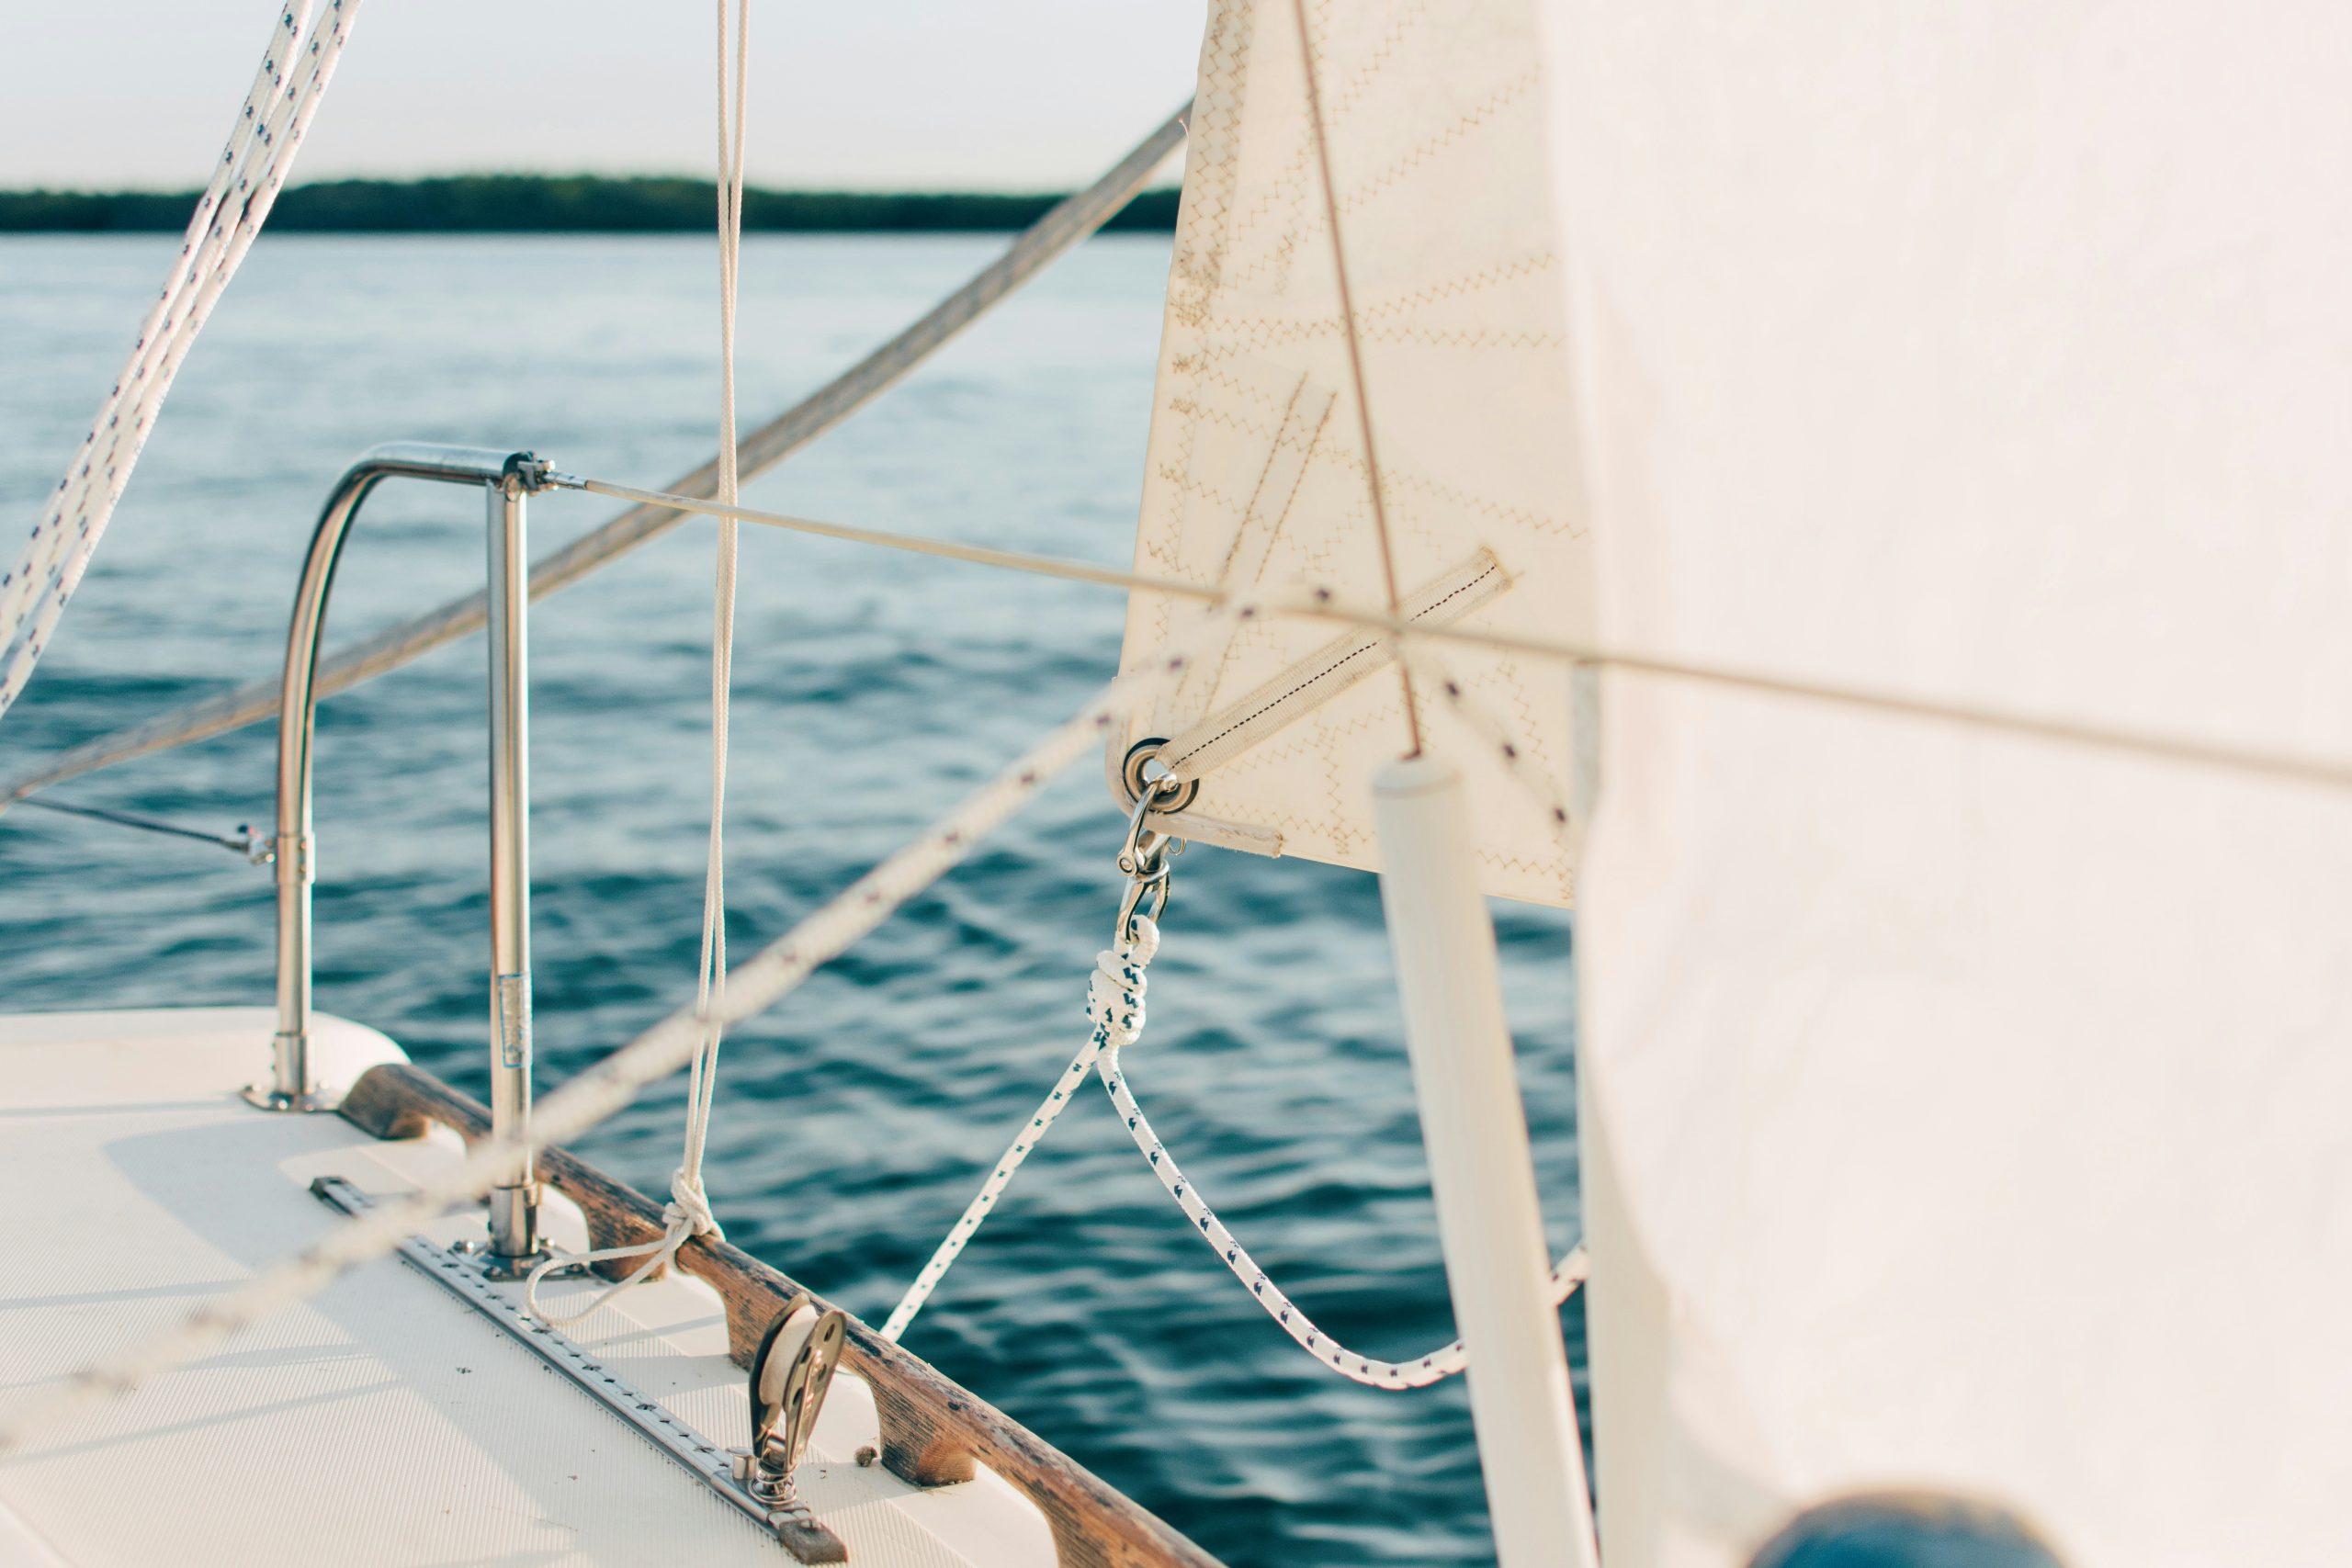 explore the world of sailing with our expert guides and tips. find the best destinations and sailing gear to make the most of your sailing adventures.